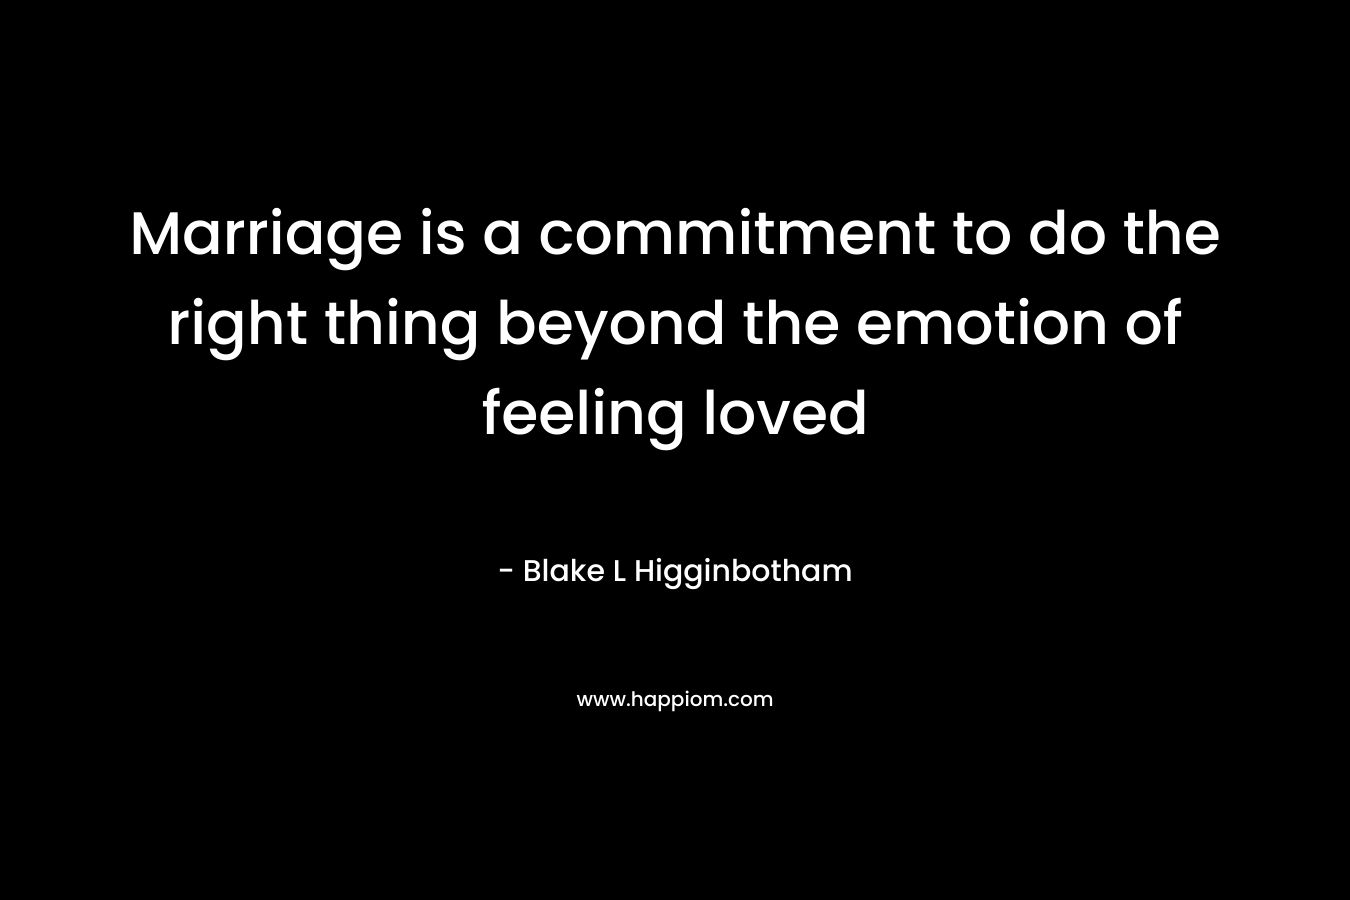 Marriage is a commitment to do the right thing beyond the emotion of feeling loved – Blake L Higginbotham